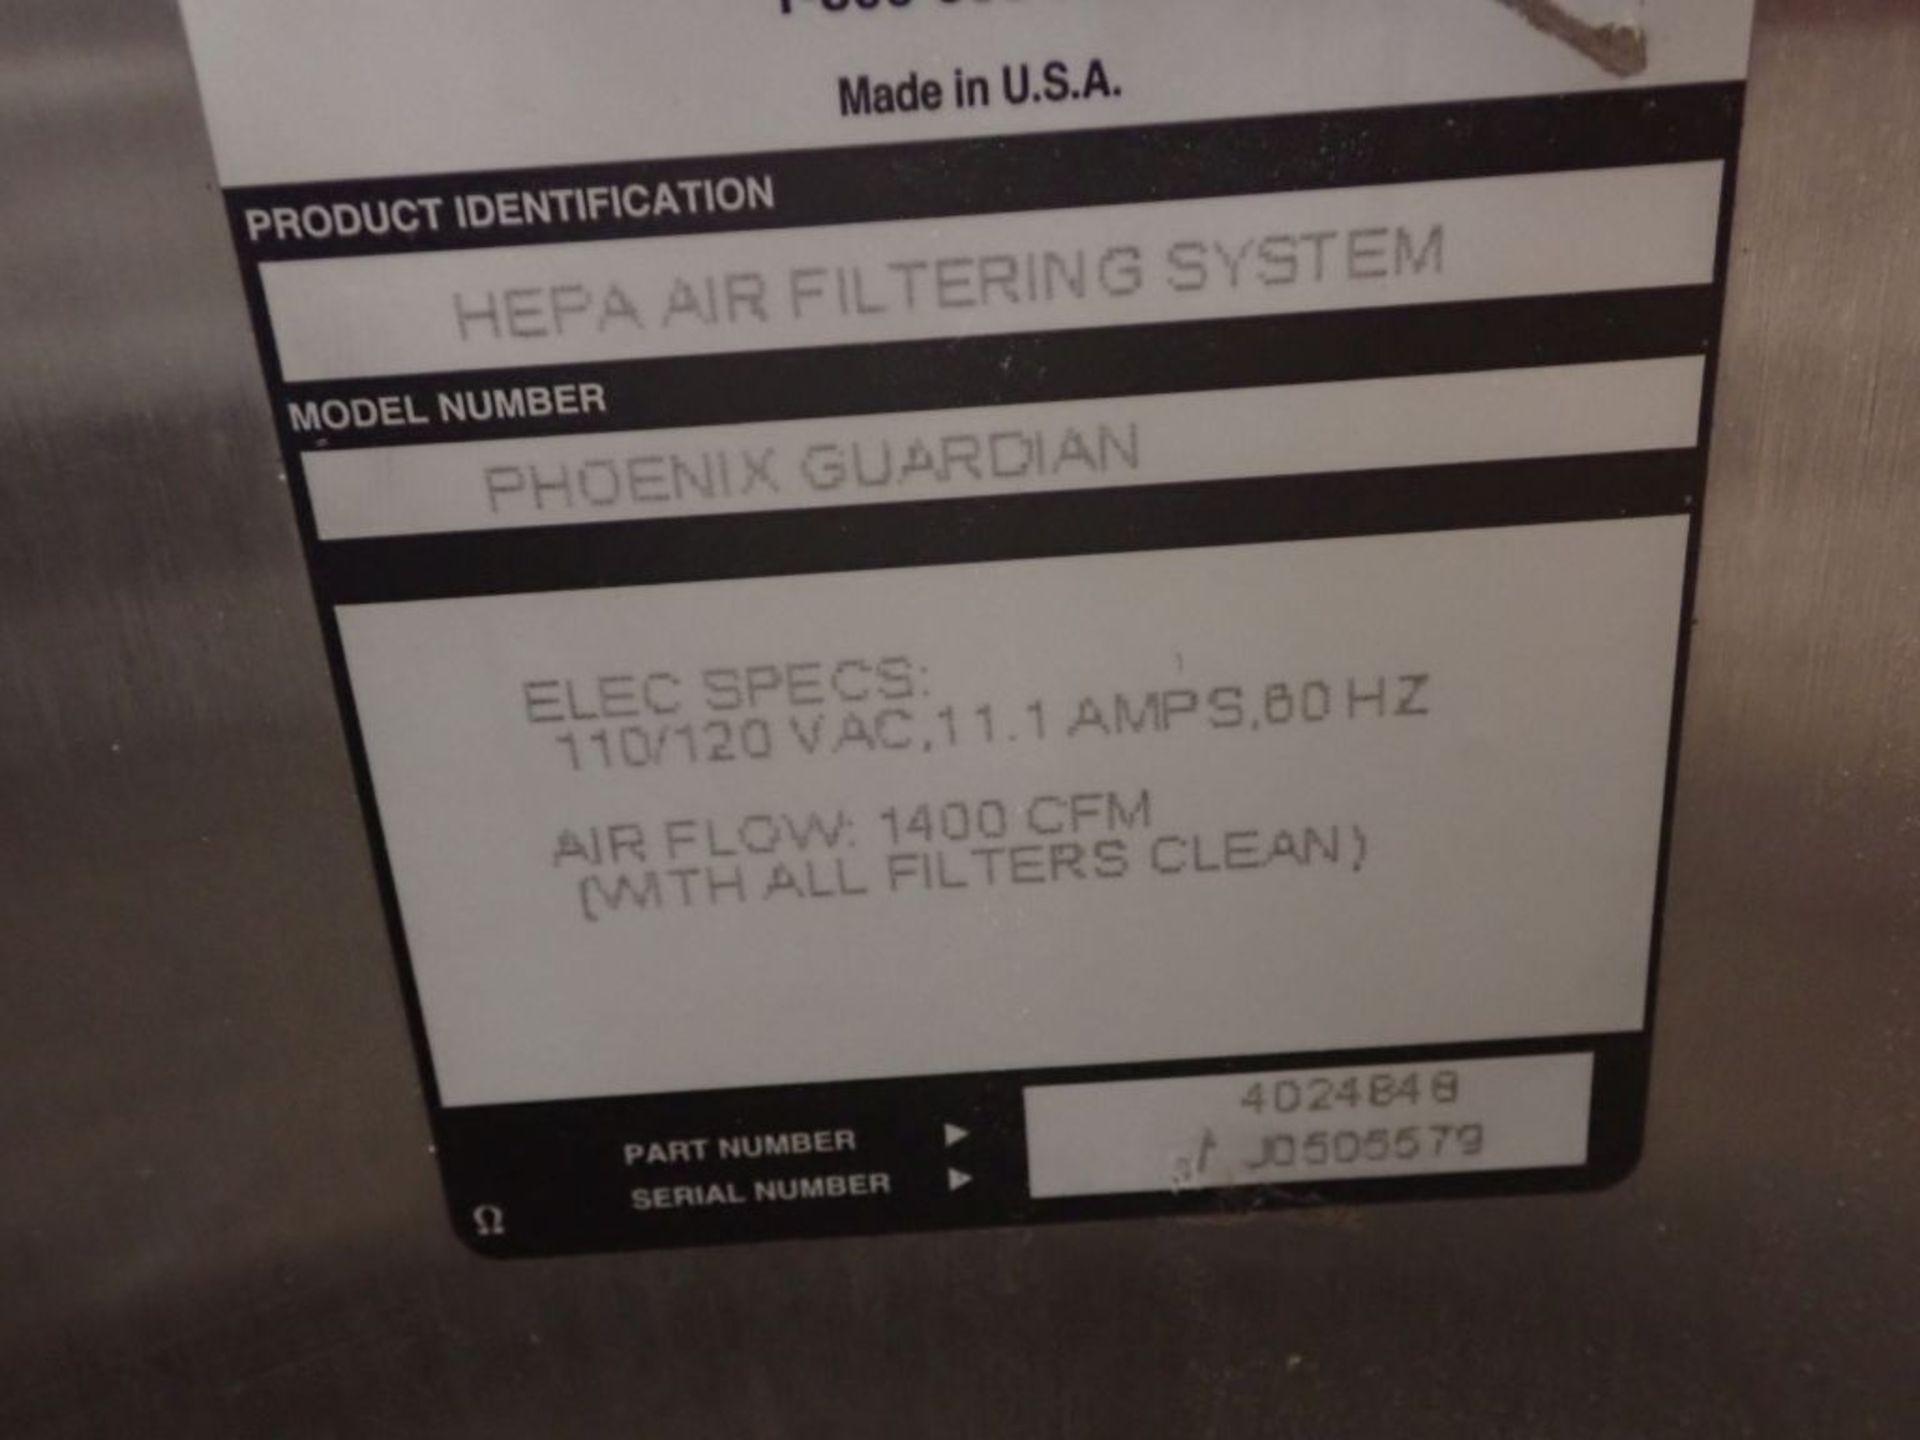 Therma Stor Phoenix Guardian Hepa Air Filtering System - Image 6 of 6